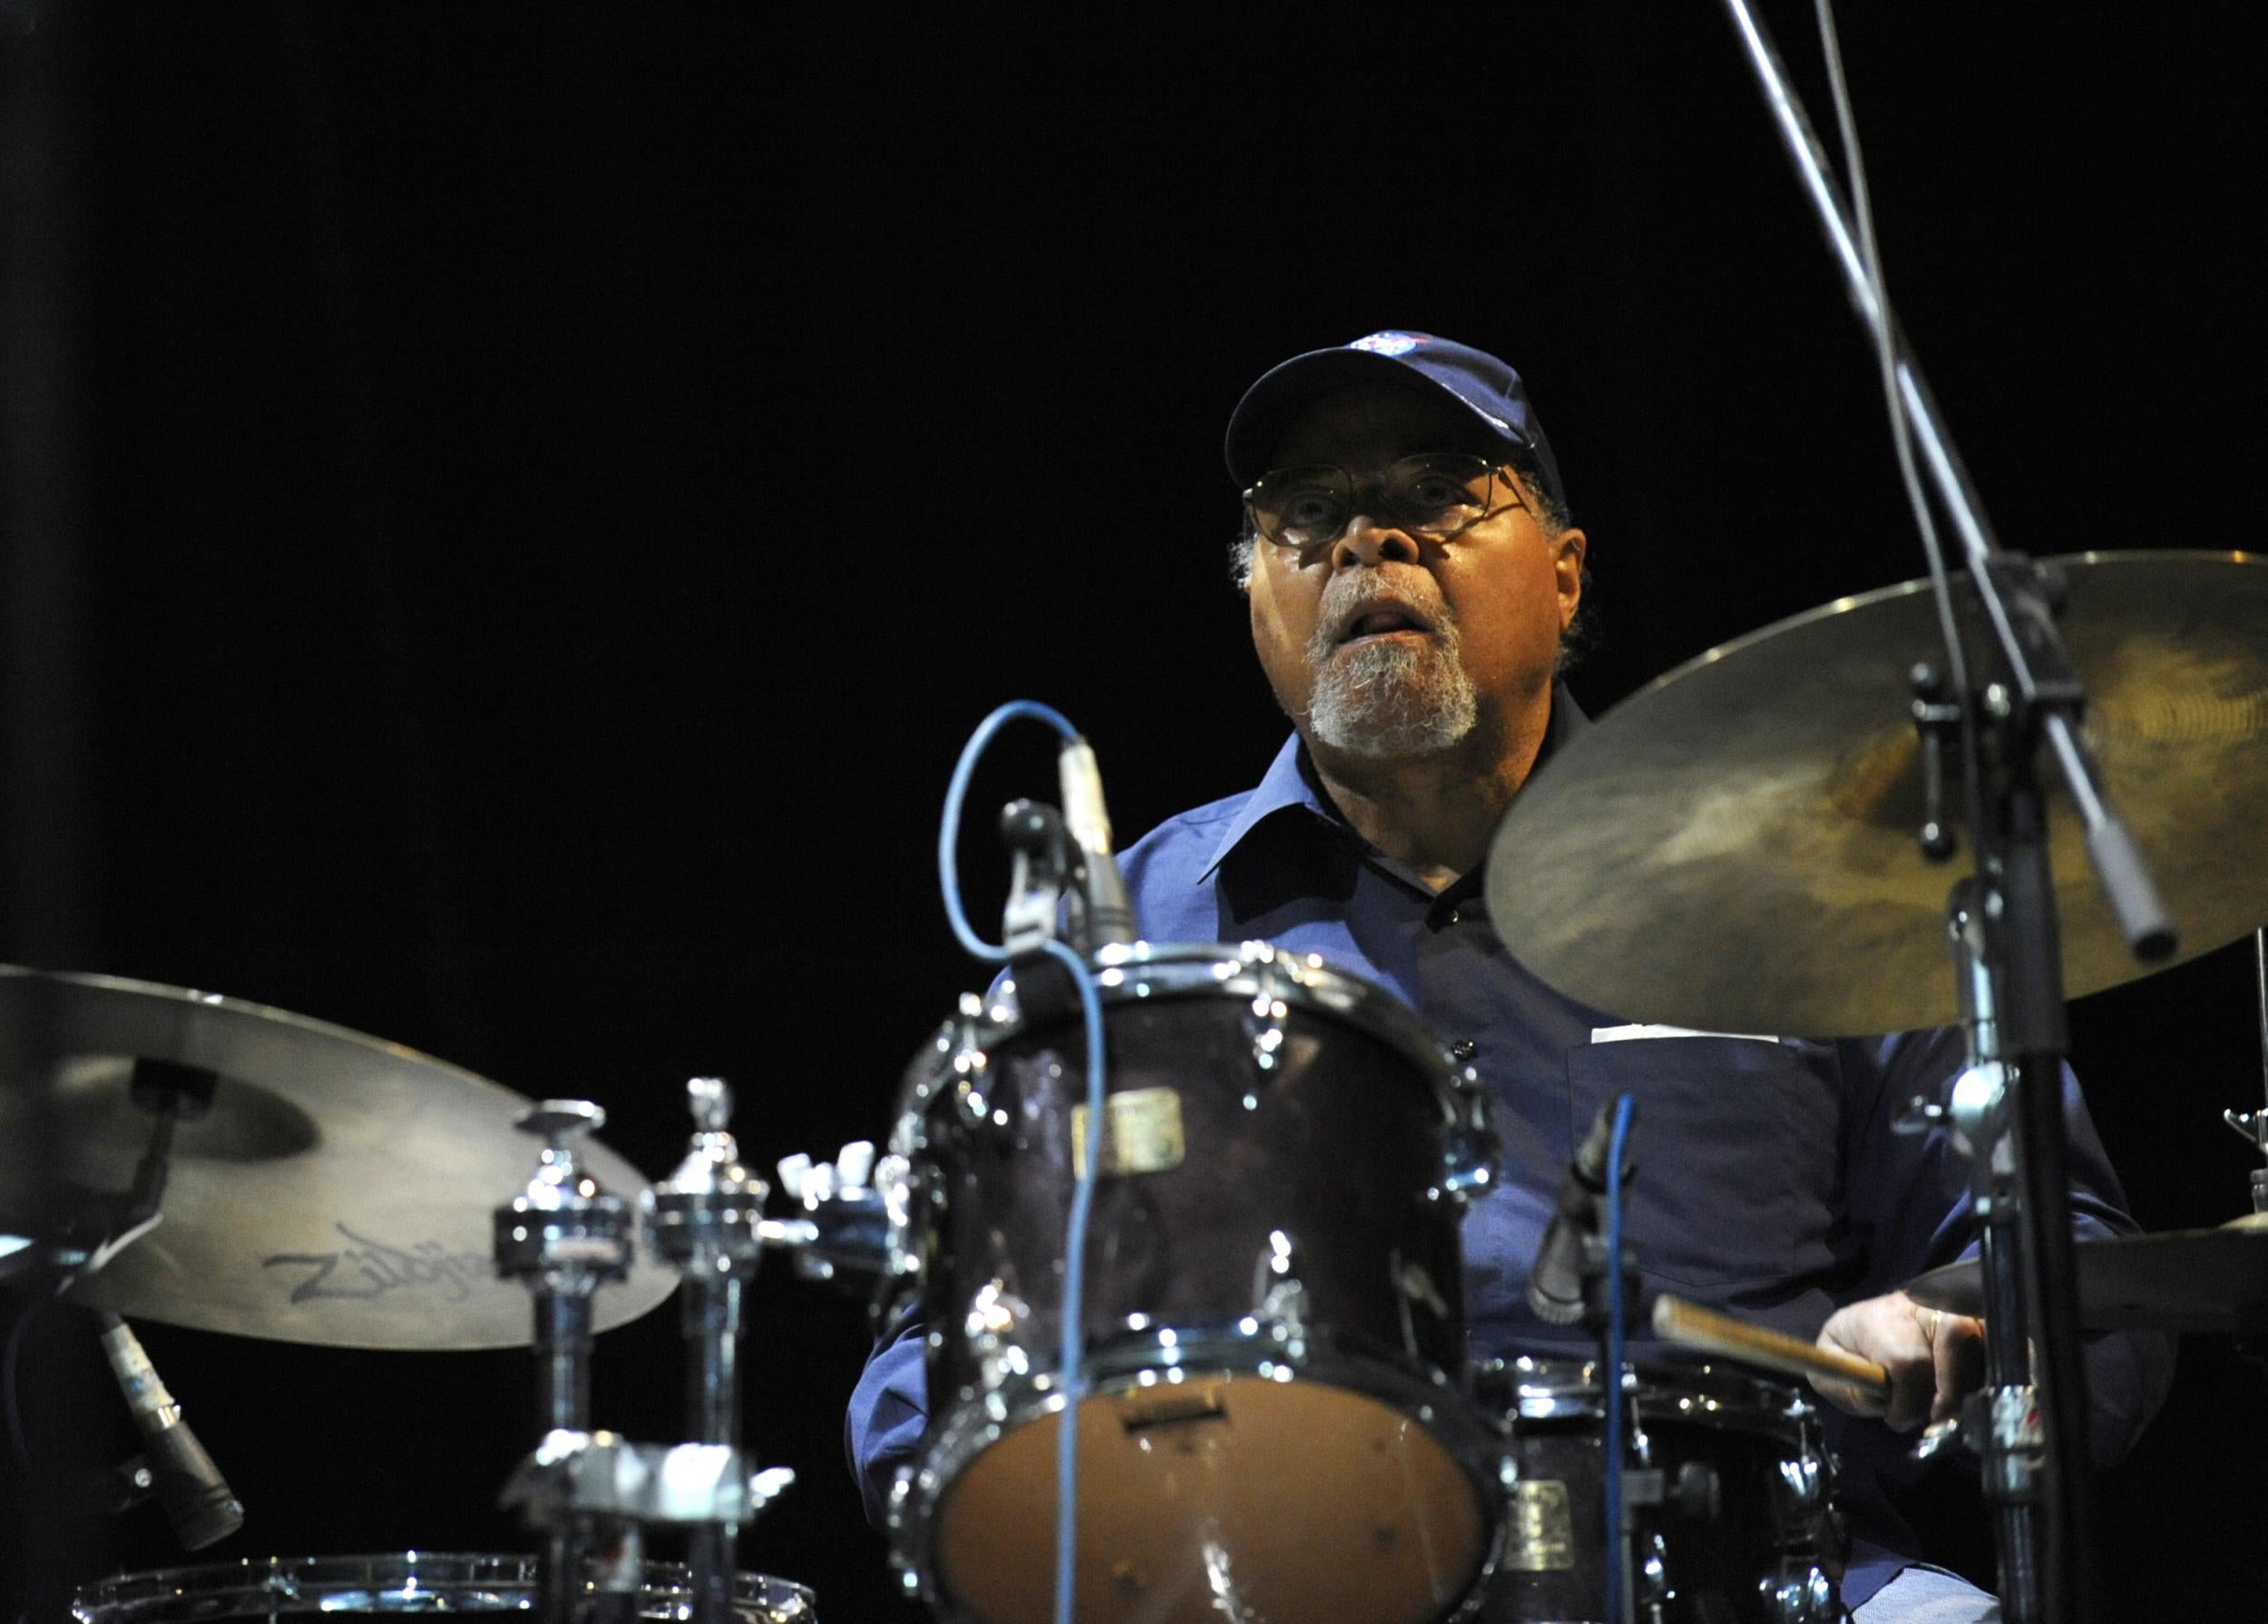 A deceptively relaxed approach: Cobb performs during a rehearsal in Madrid in 2009